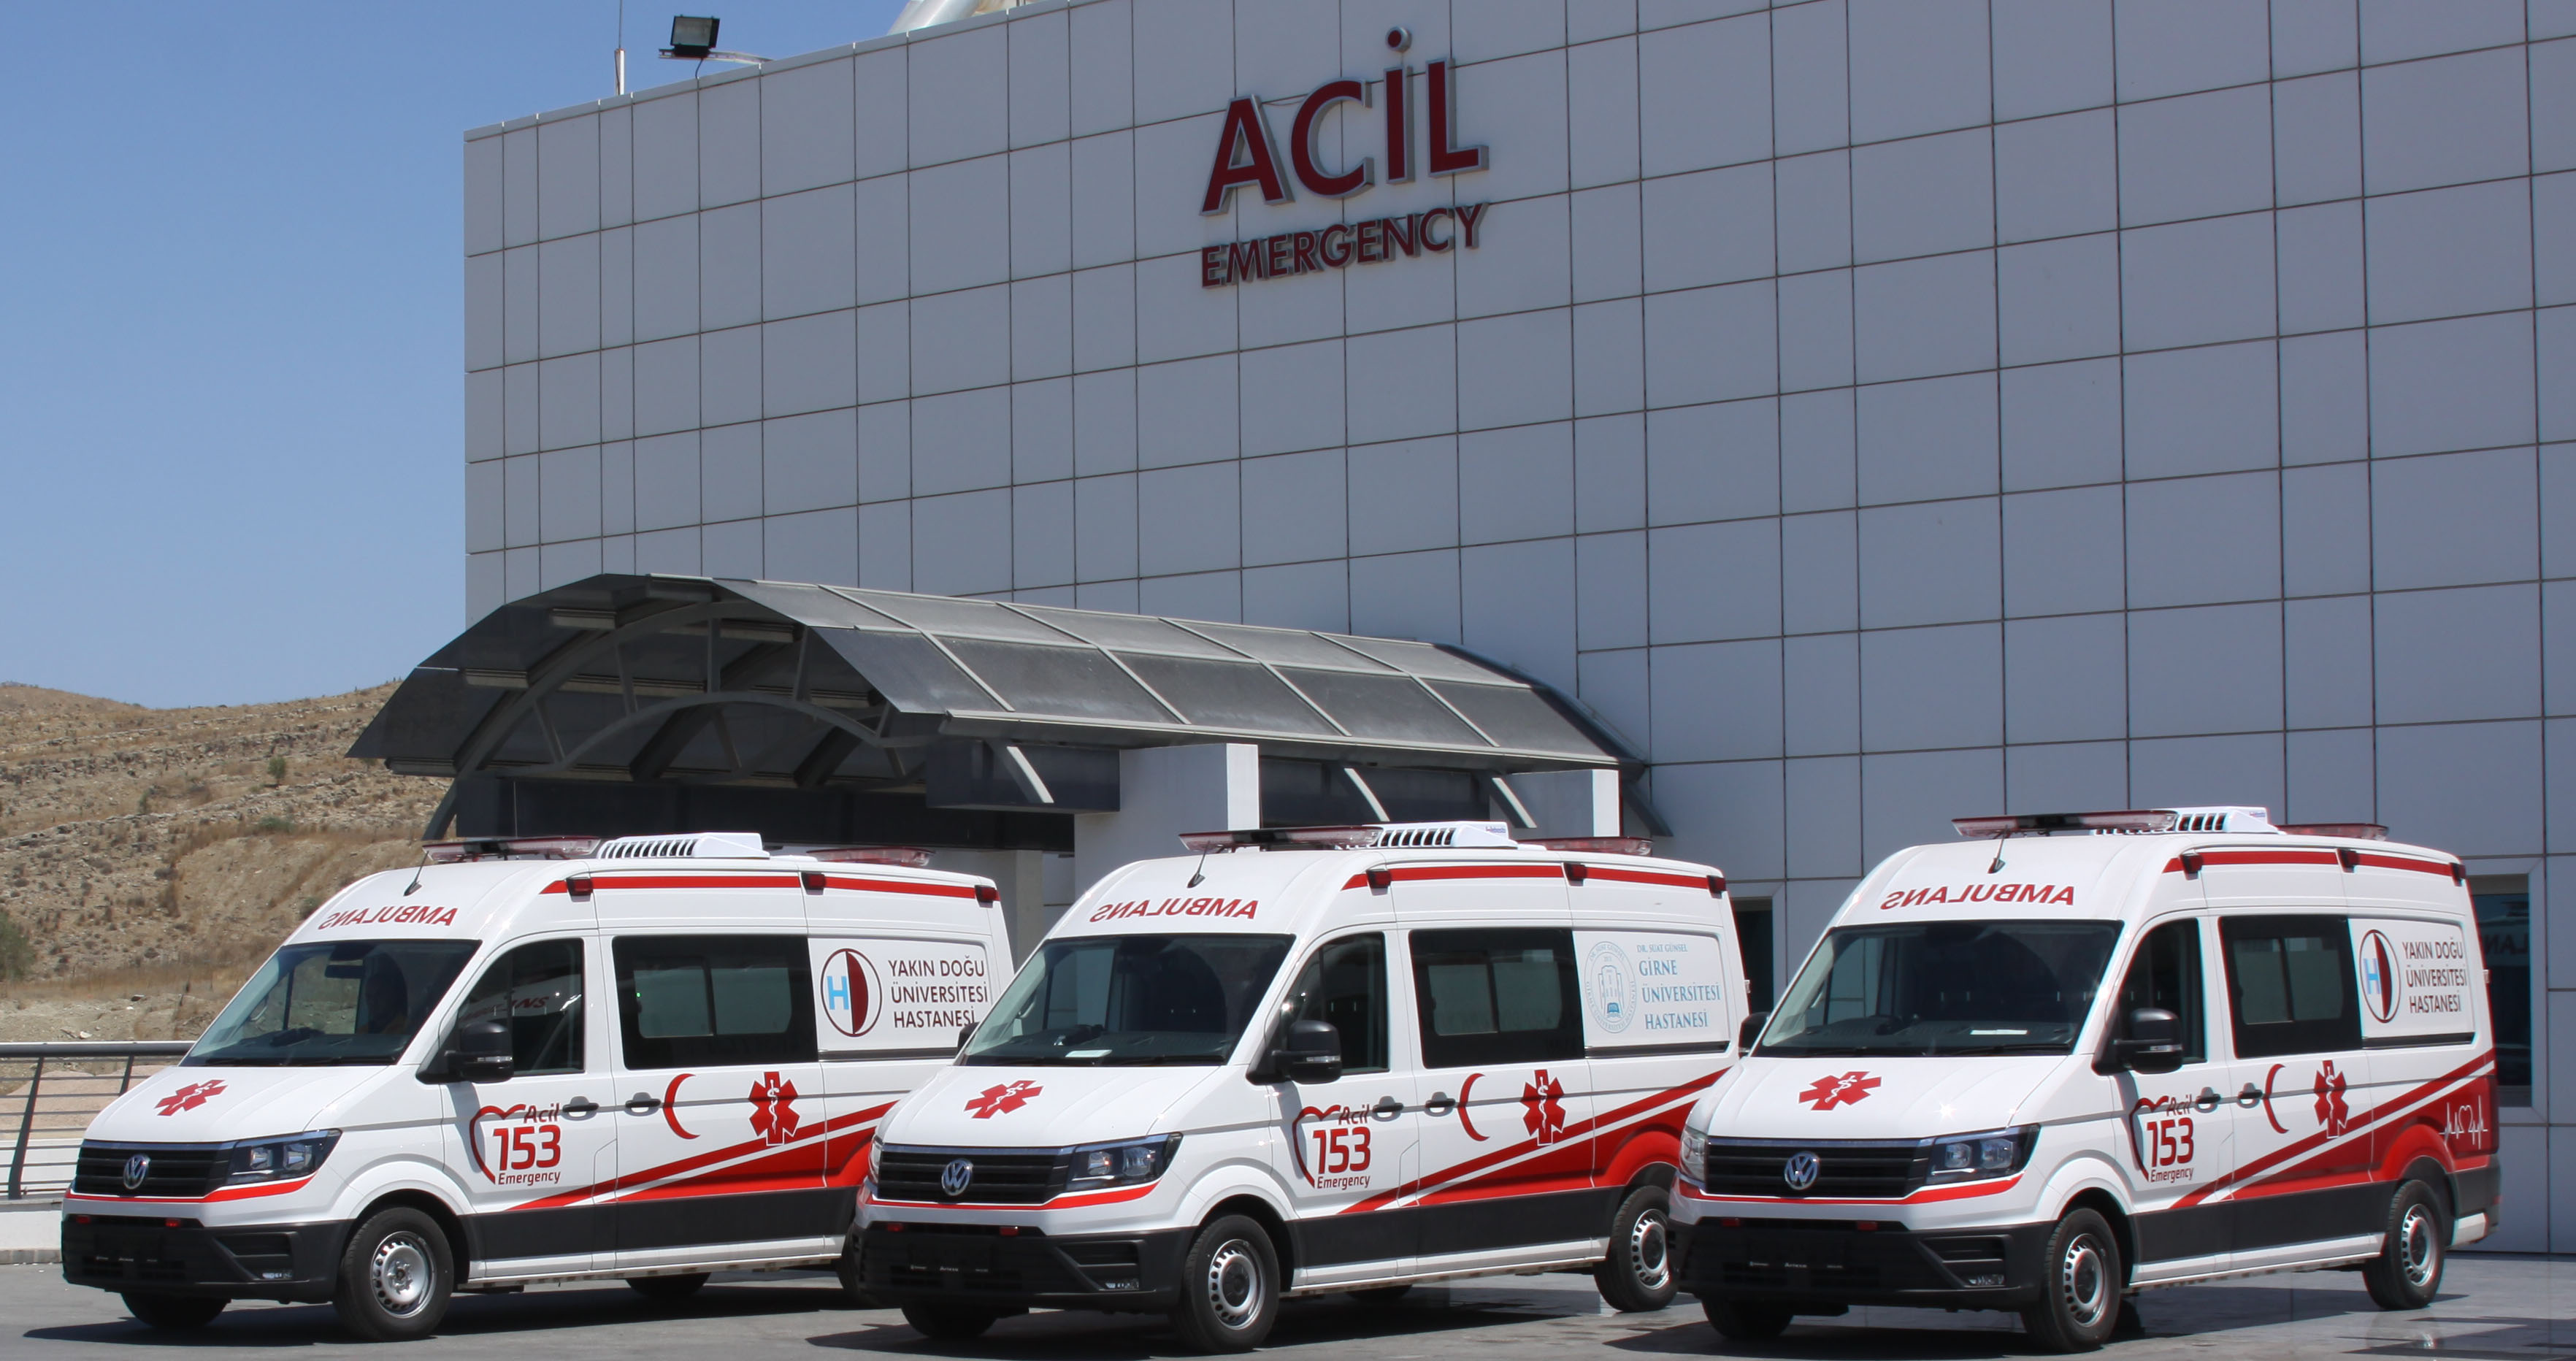 153 Emergency Call Center, which provides joint service for Near East University Hospital and Dr. Suat GÜNSEL University of Kyrenia Hospital, ensures uninterrupted services across the country with its twelve fully equipped ambulances